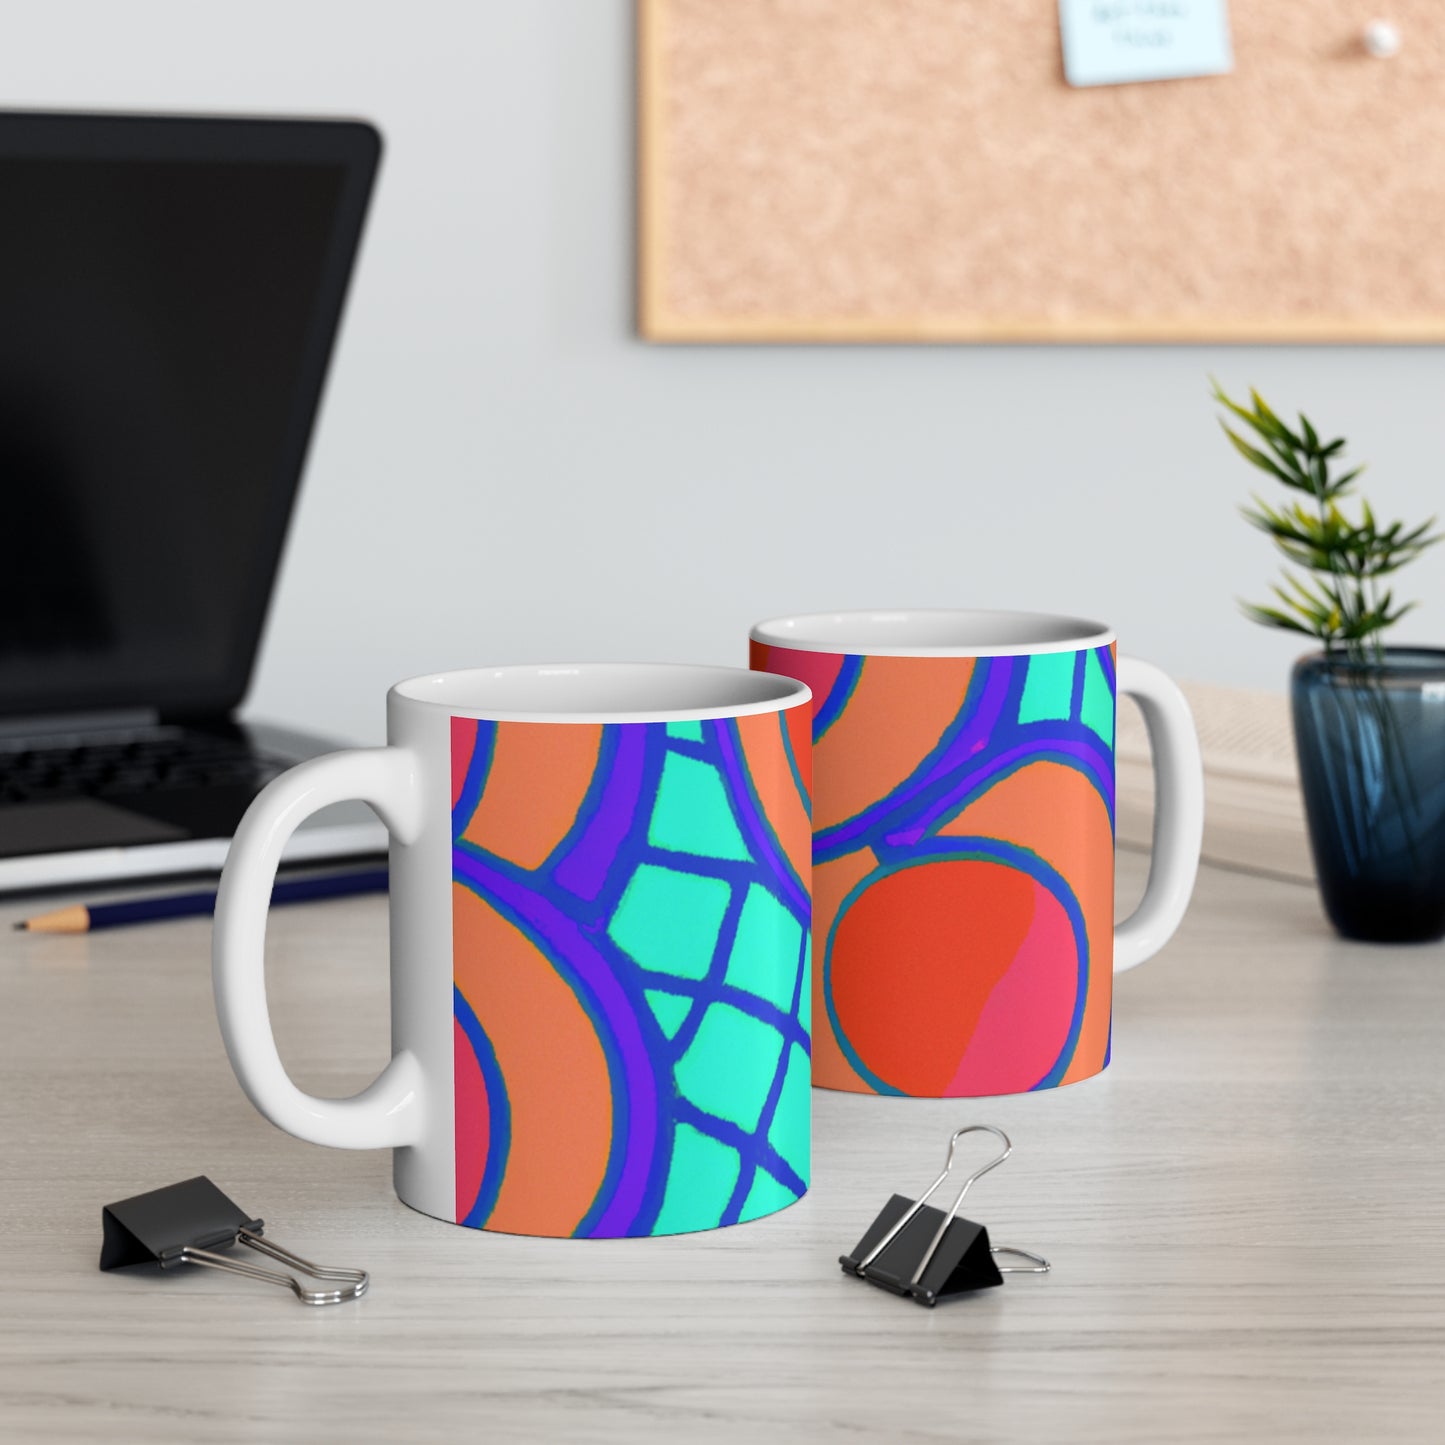 Charlotte's Classic Cuppa Coffee - Psychedelic Coffee Cup Mug 11 Ounce